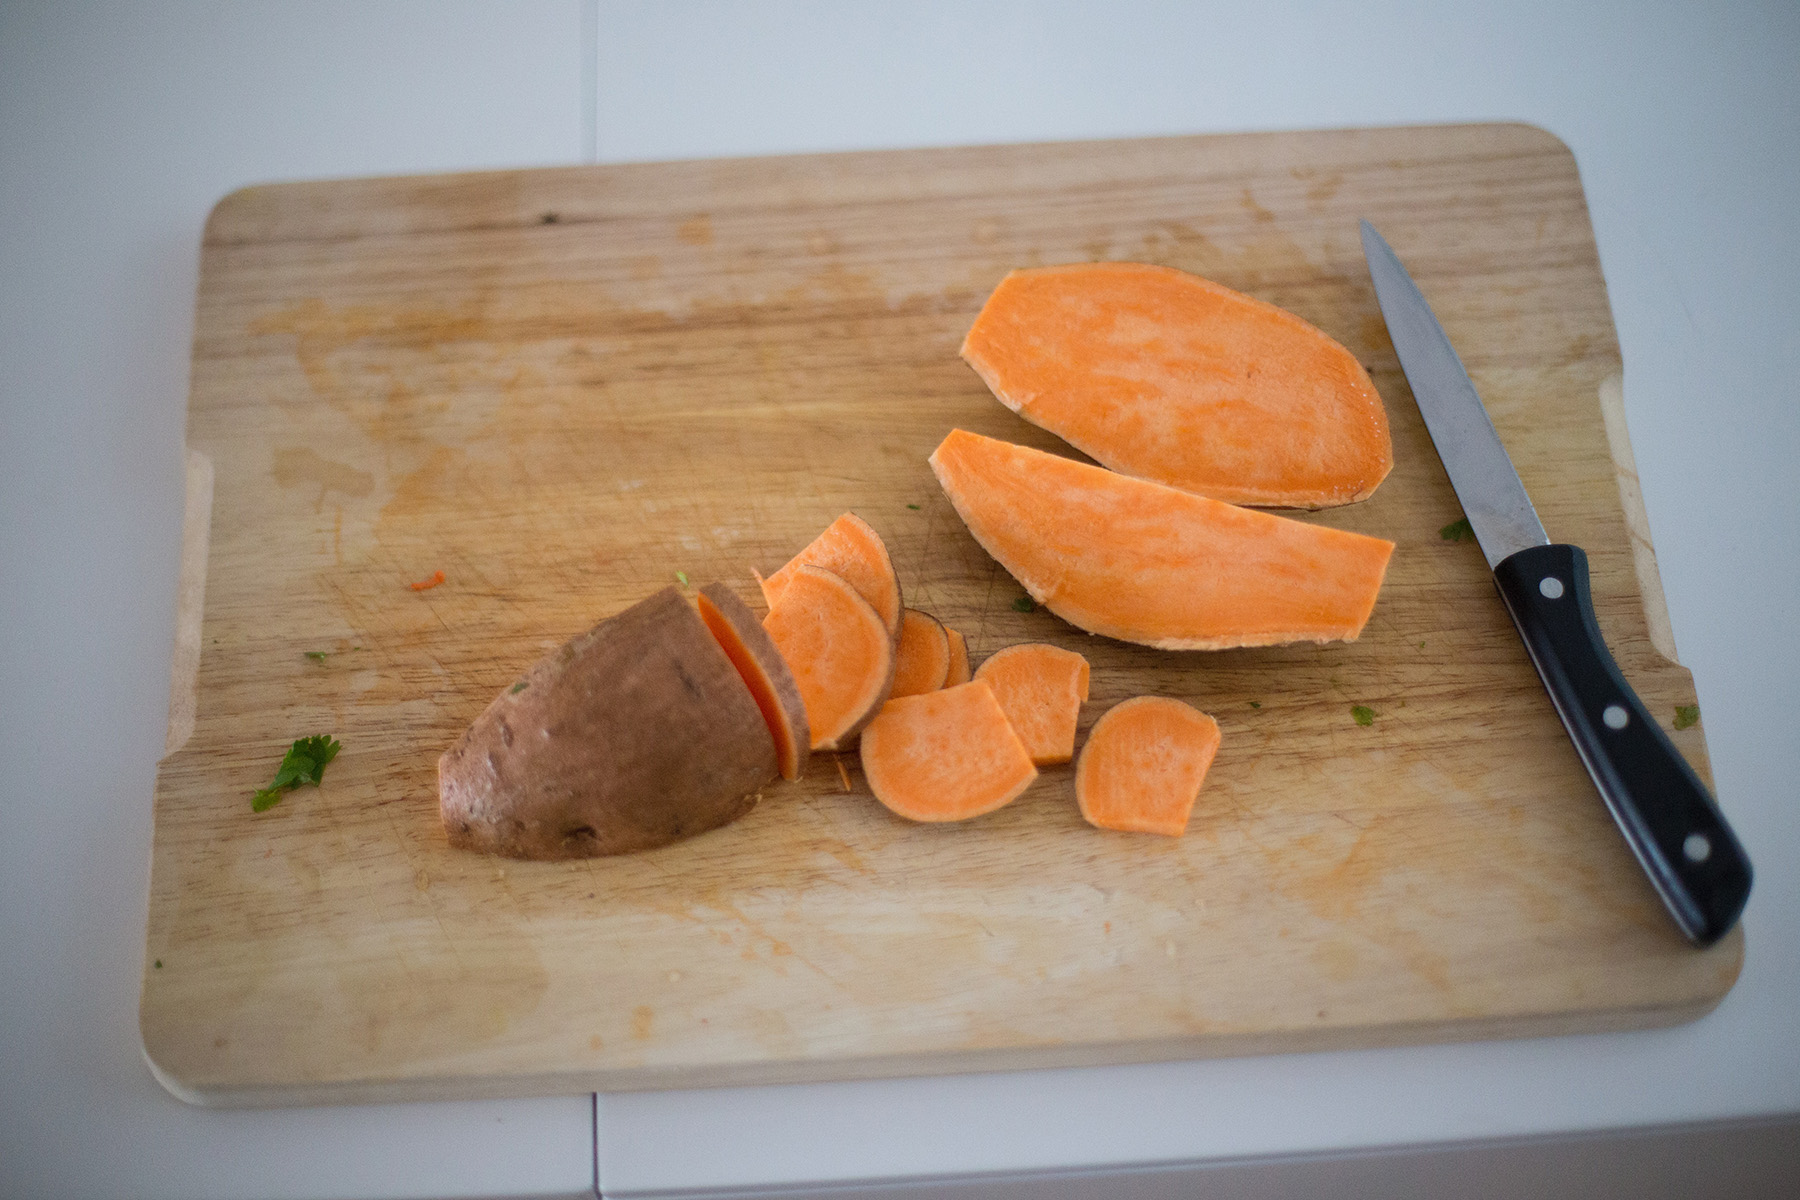 How to Naturally Clean, Deodorize, and Disinfect a Cutting Board